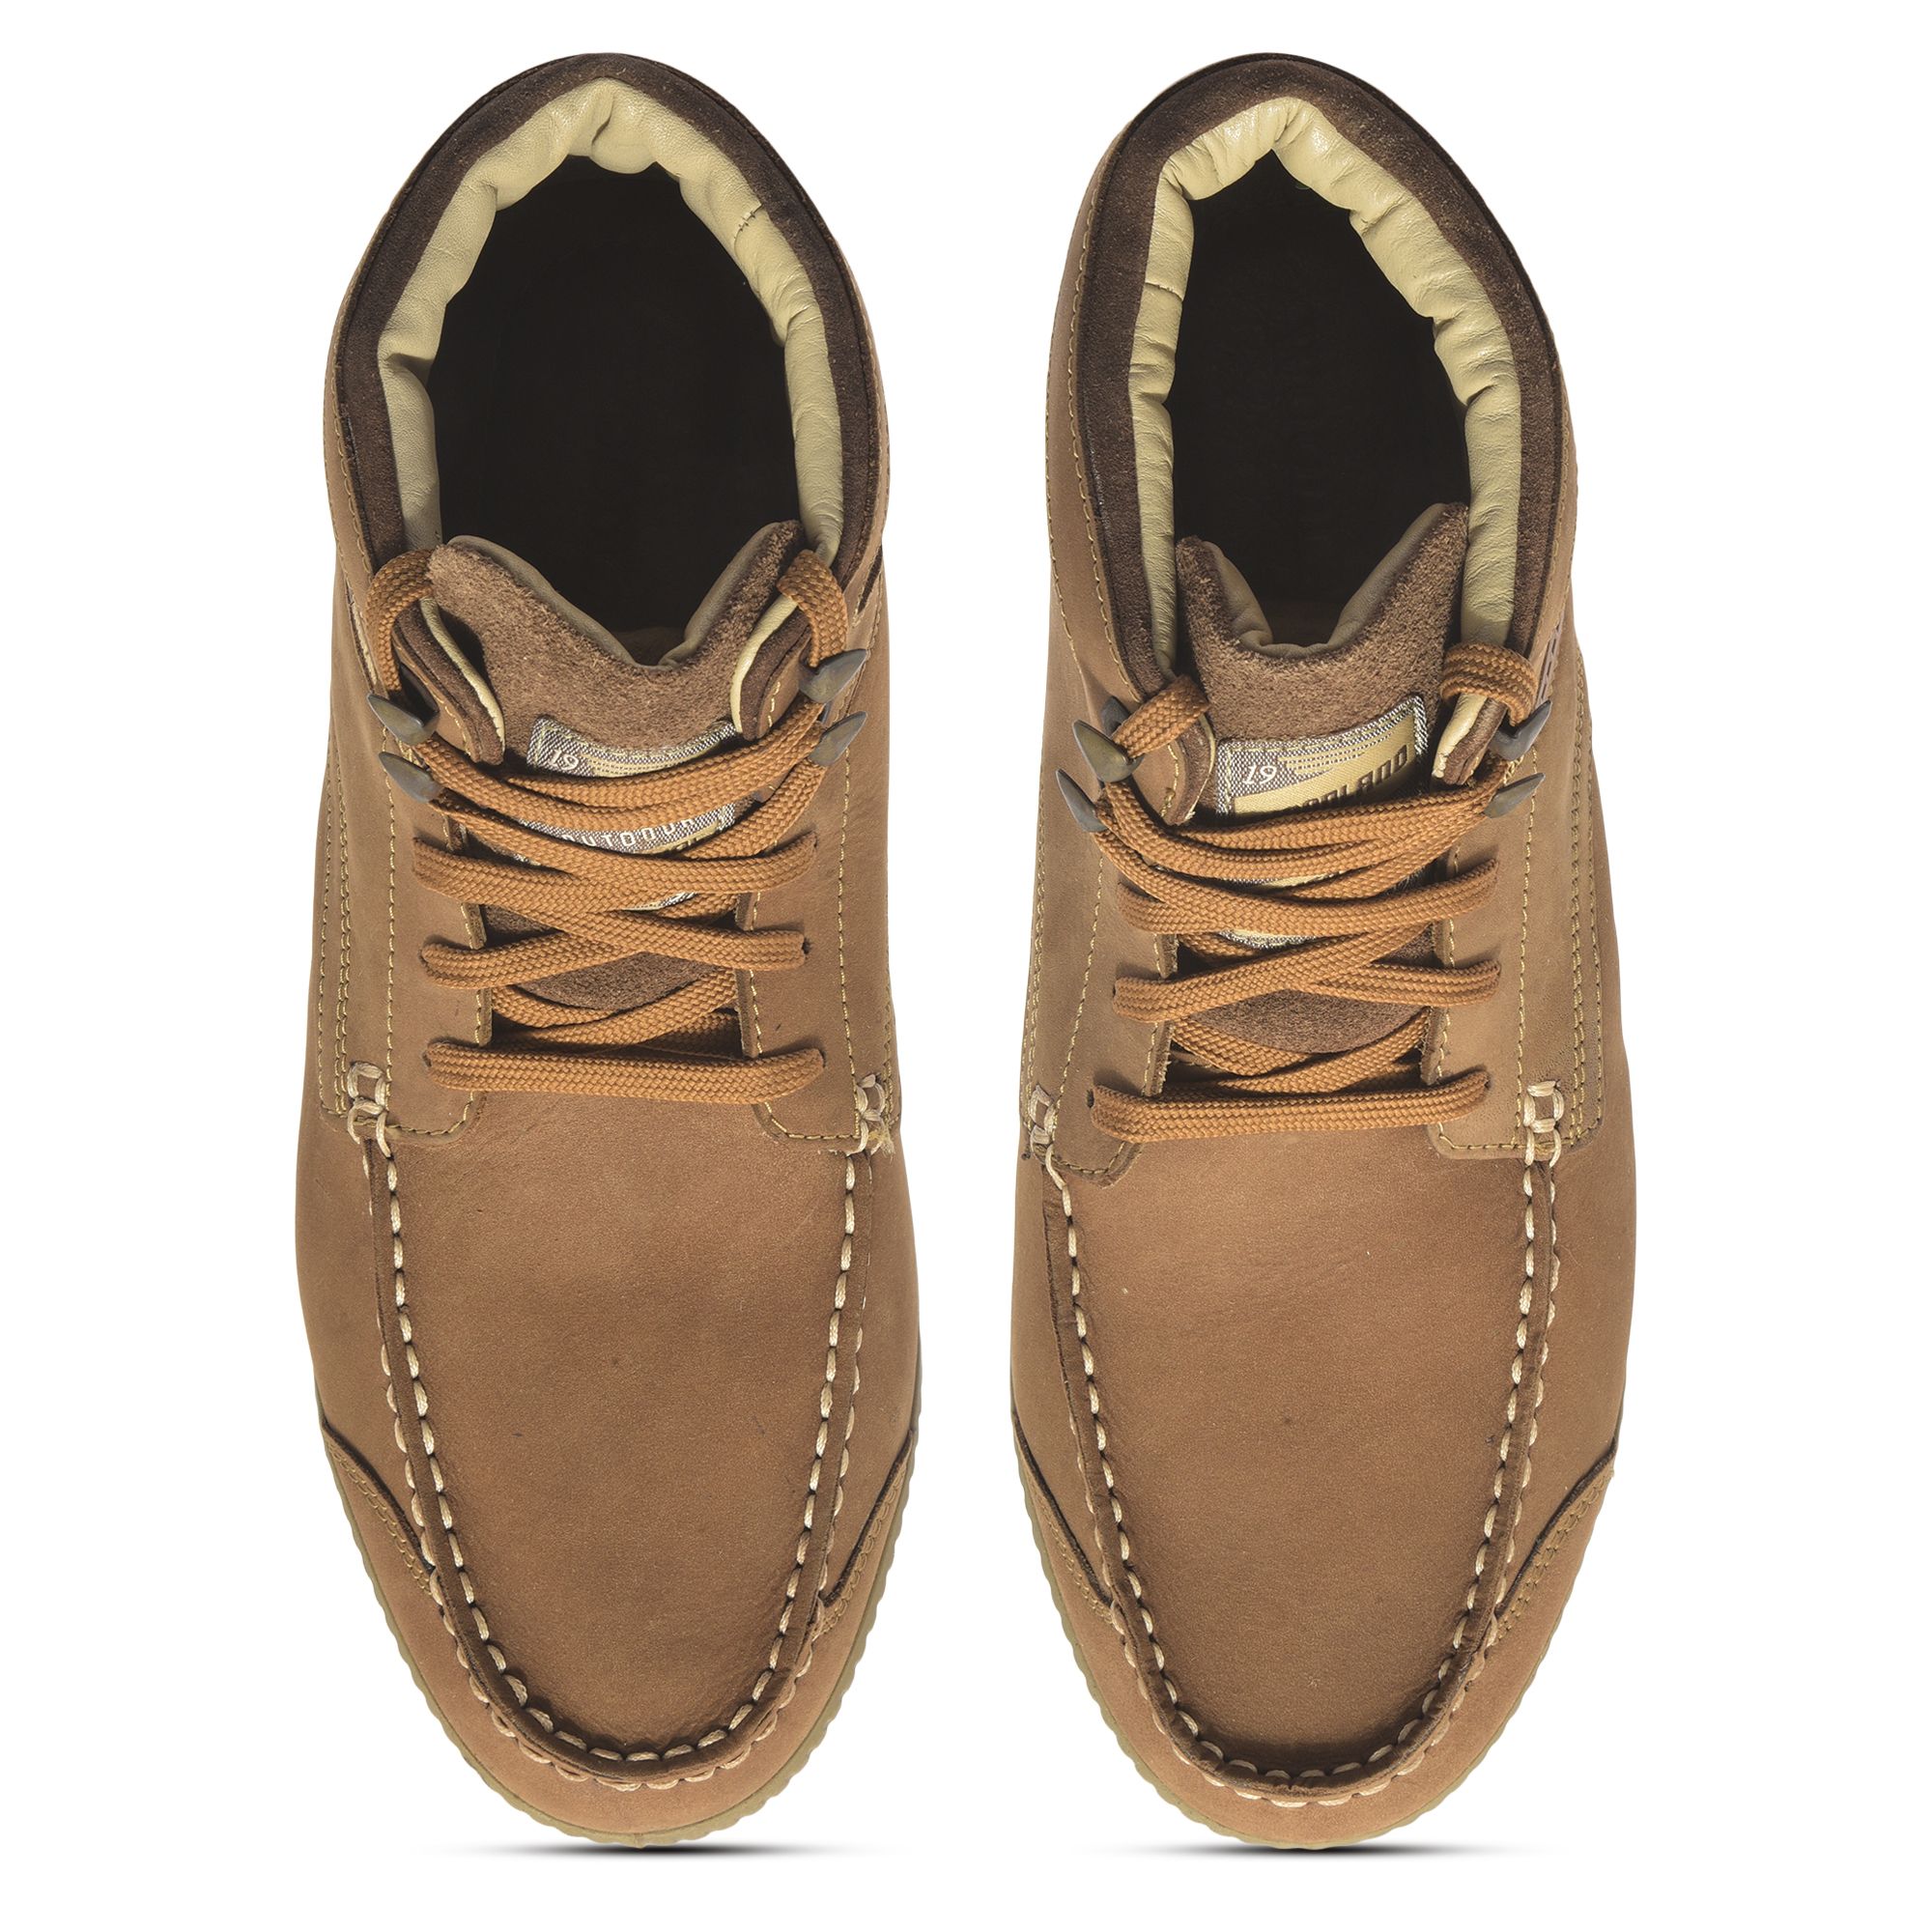 Tobacco casual shoes for men